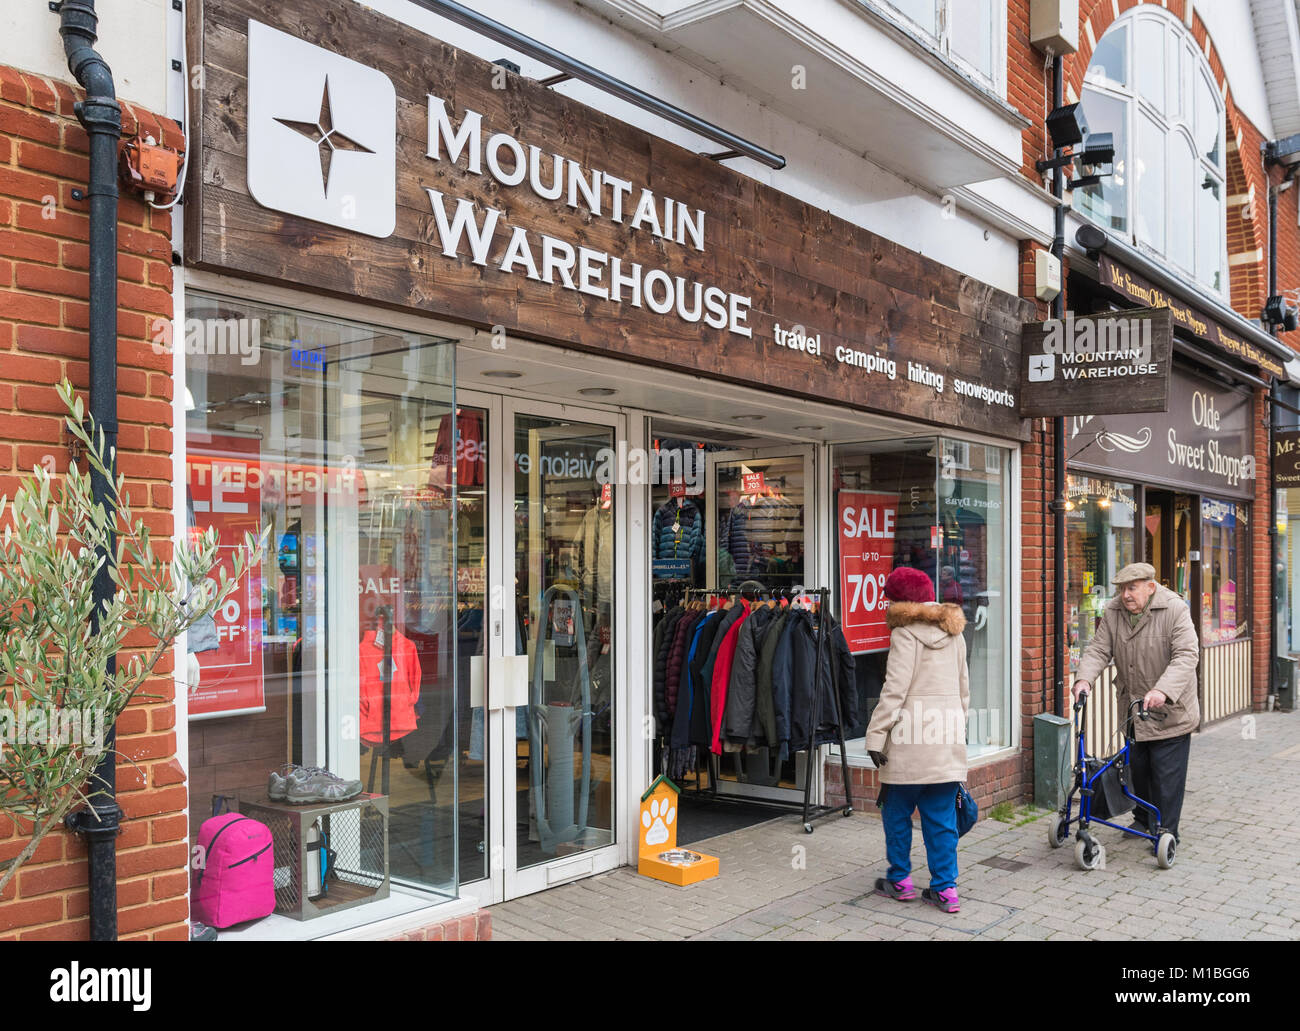 Mountain Warehouse retail store front entrance in Petersfield, Hampshire, England UK. Shop front. Stock Photo